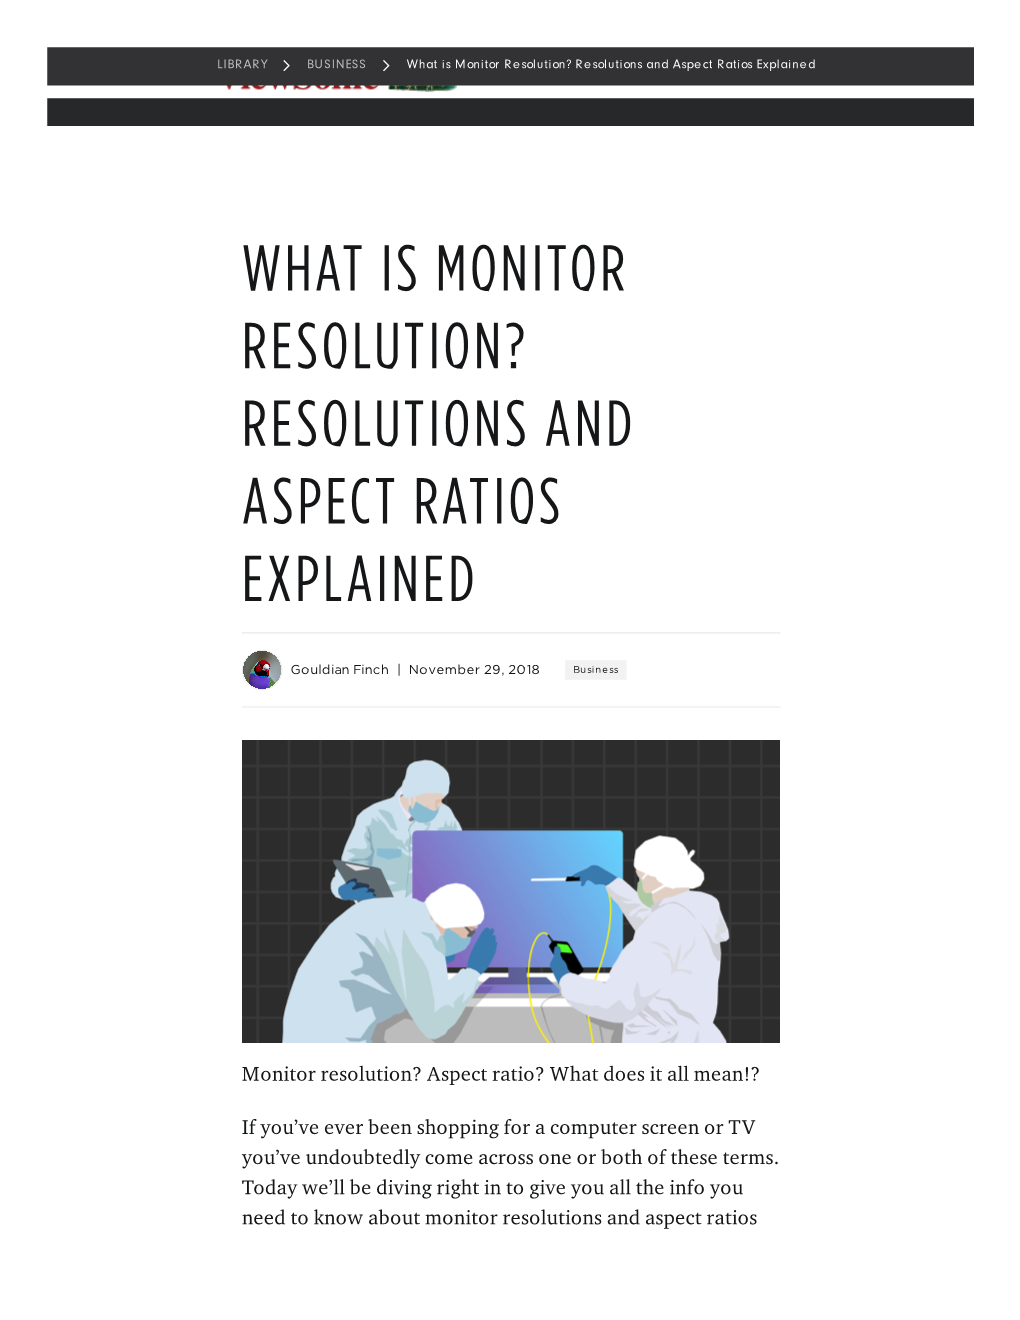 What Is Monitor Resolution? Resolutions and Aspect Ratios Expla�Ined